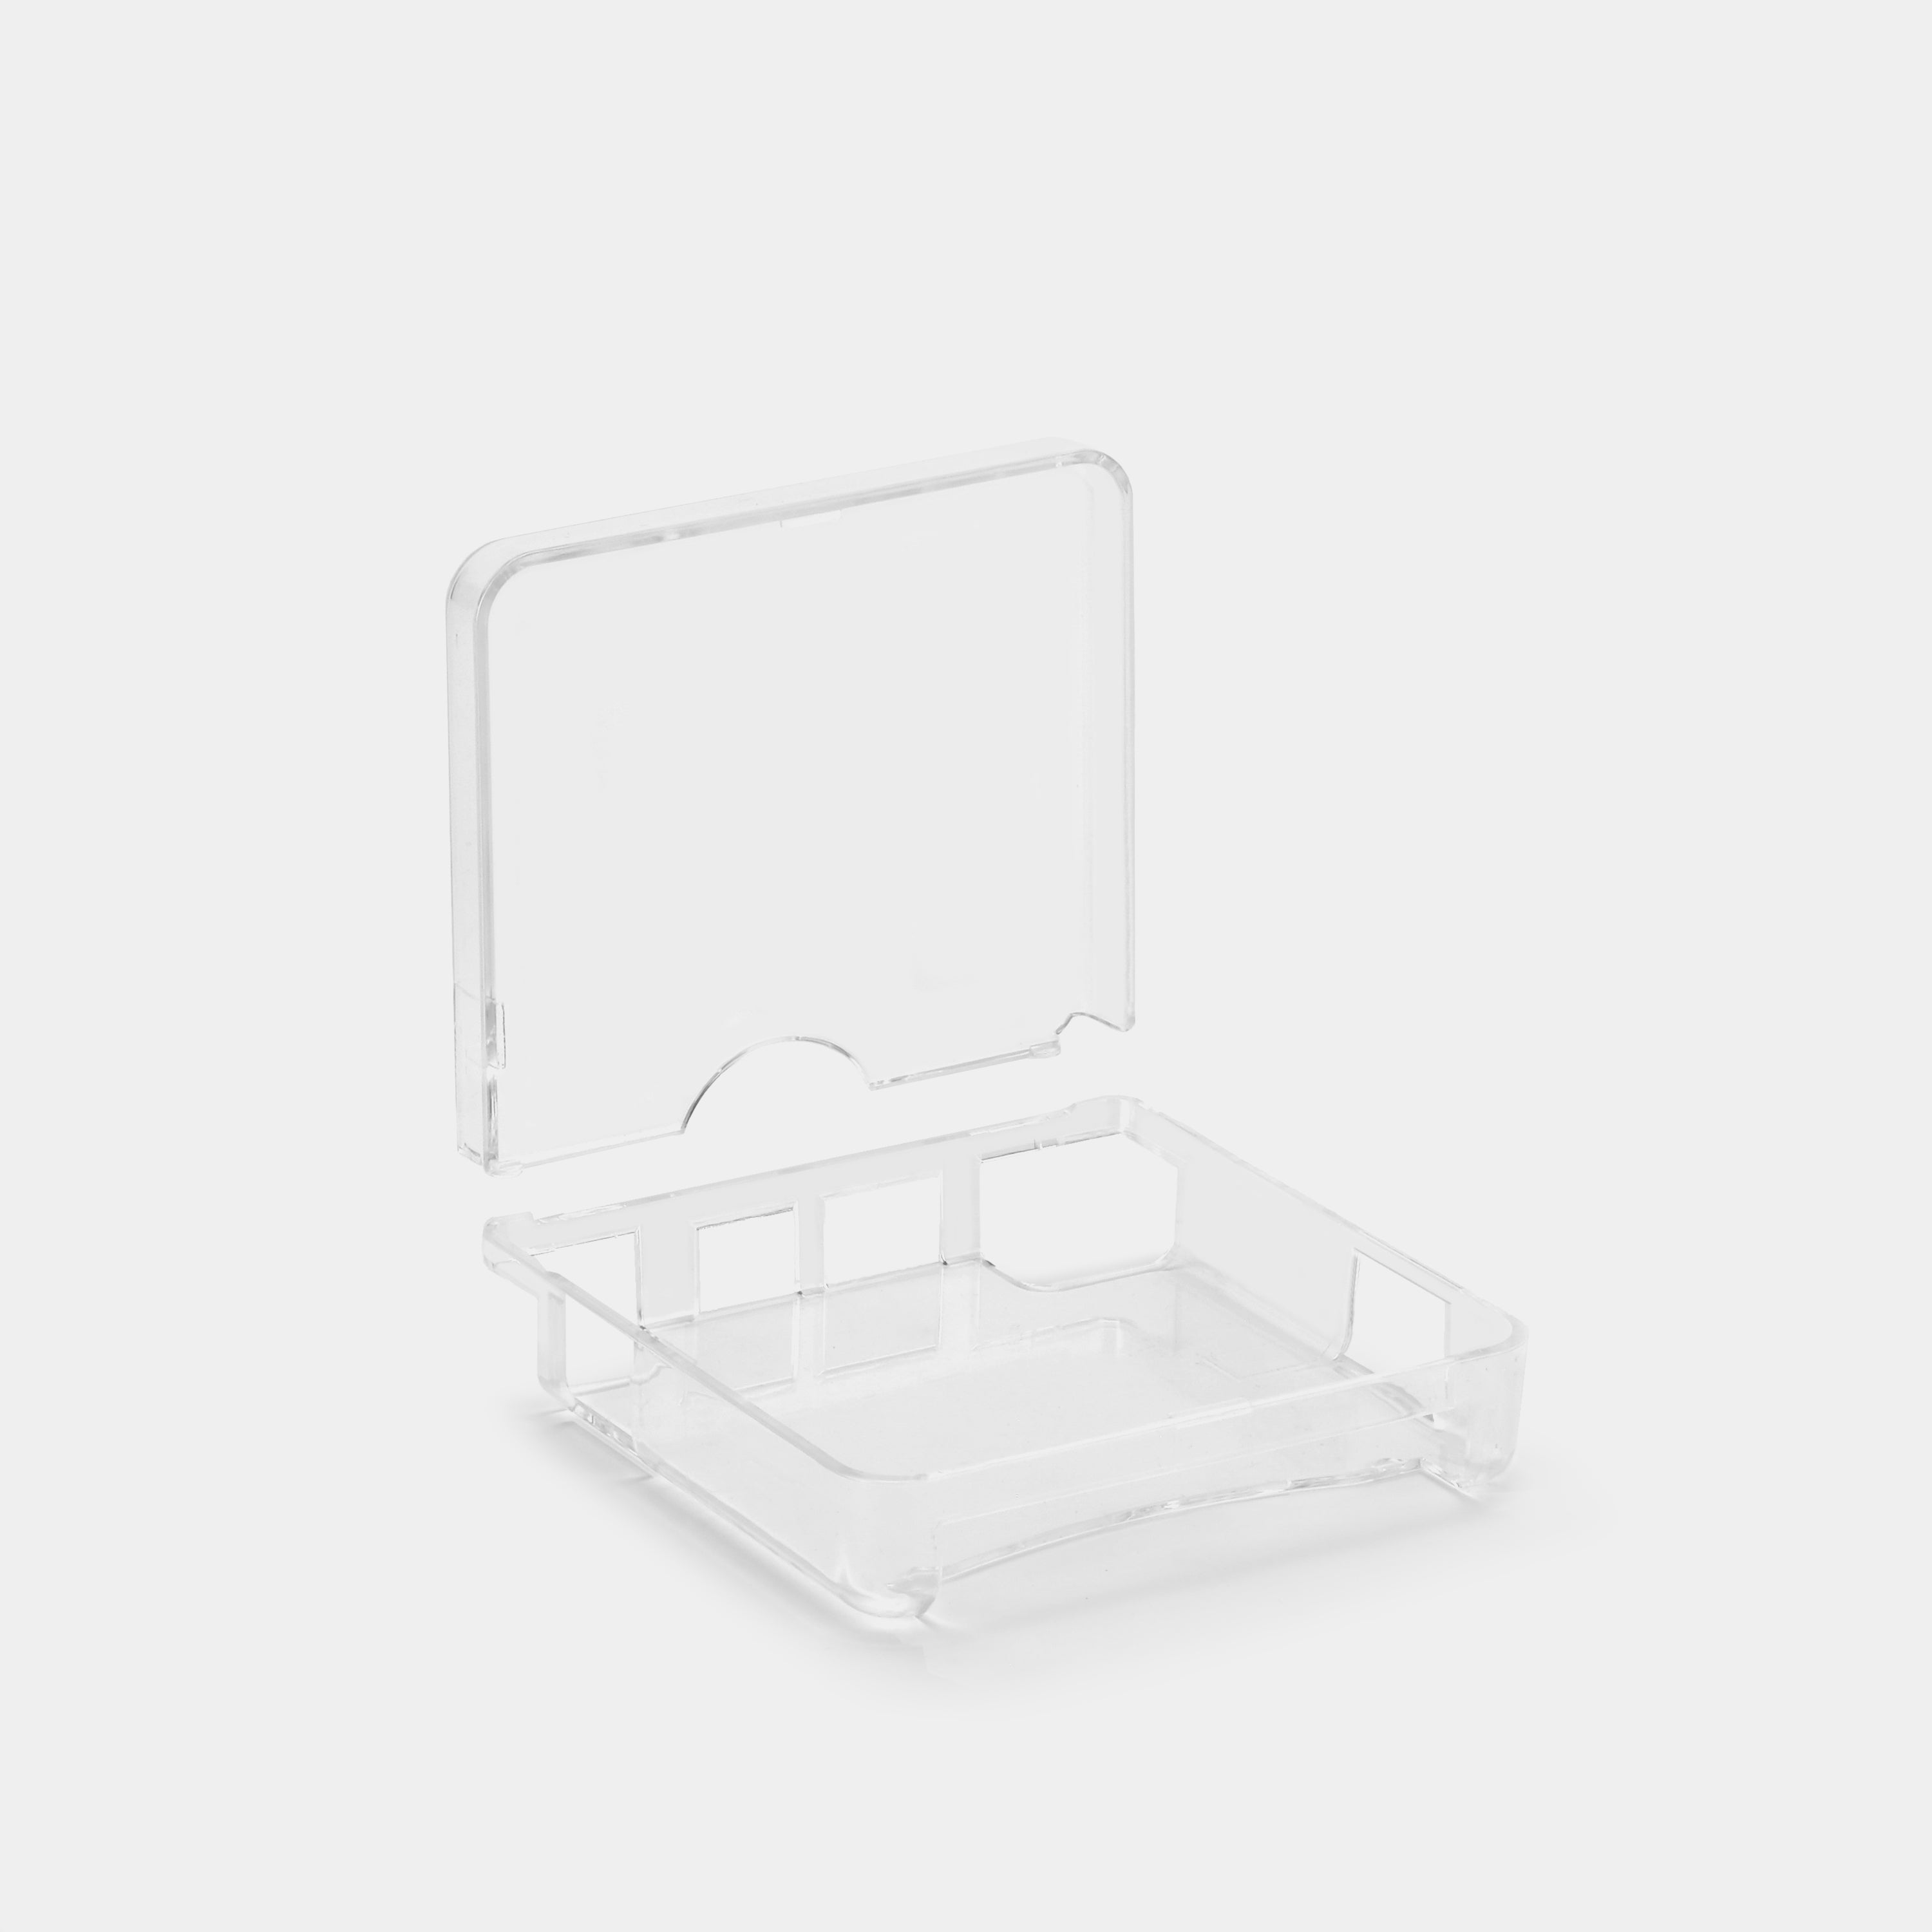 Game Boy Advance SP Clear Protective Case